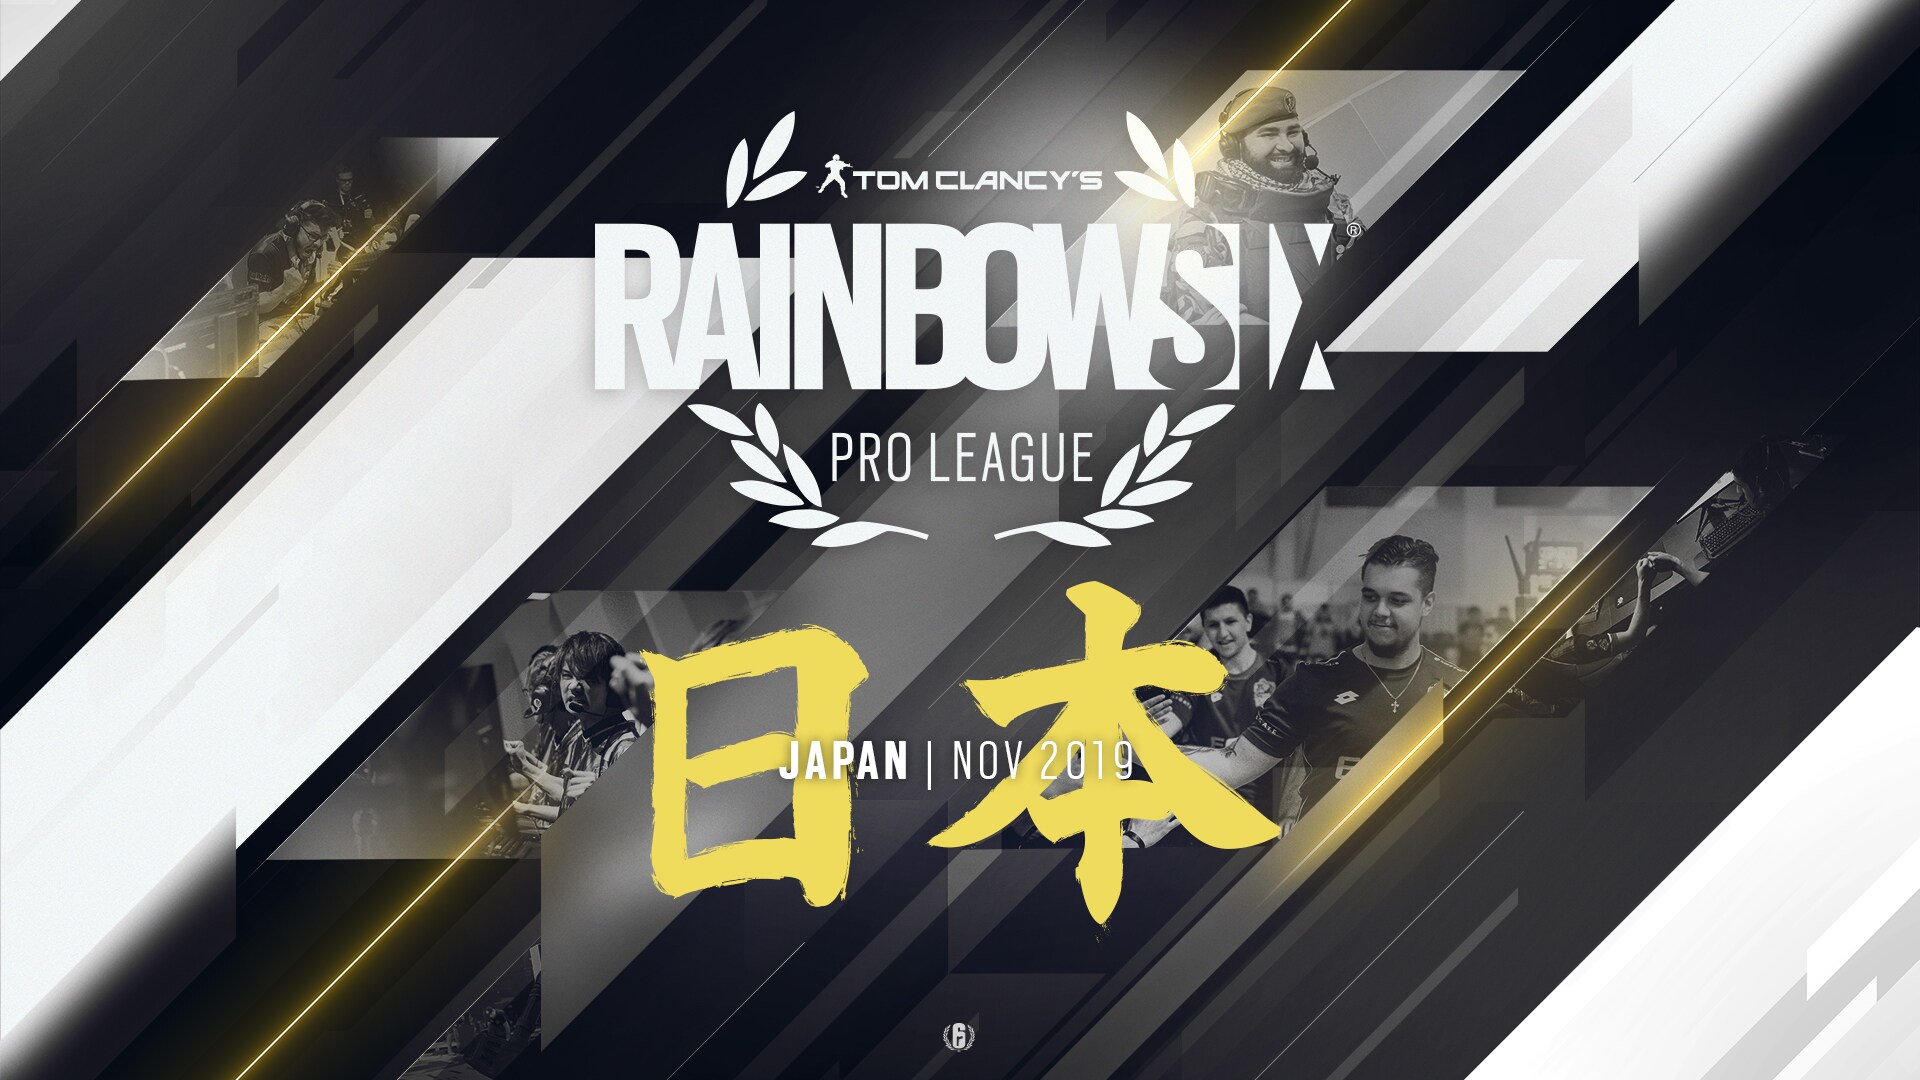 YOUR EVENT GUIDE TO THE RAINBOW SIX SEASON X PRO LEAGUE FINALS